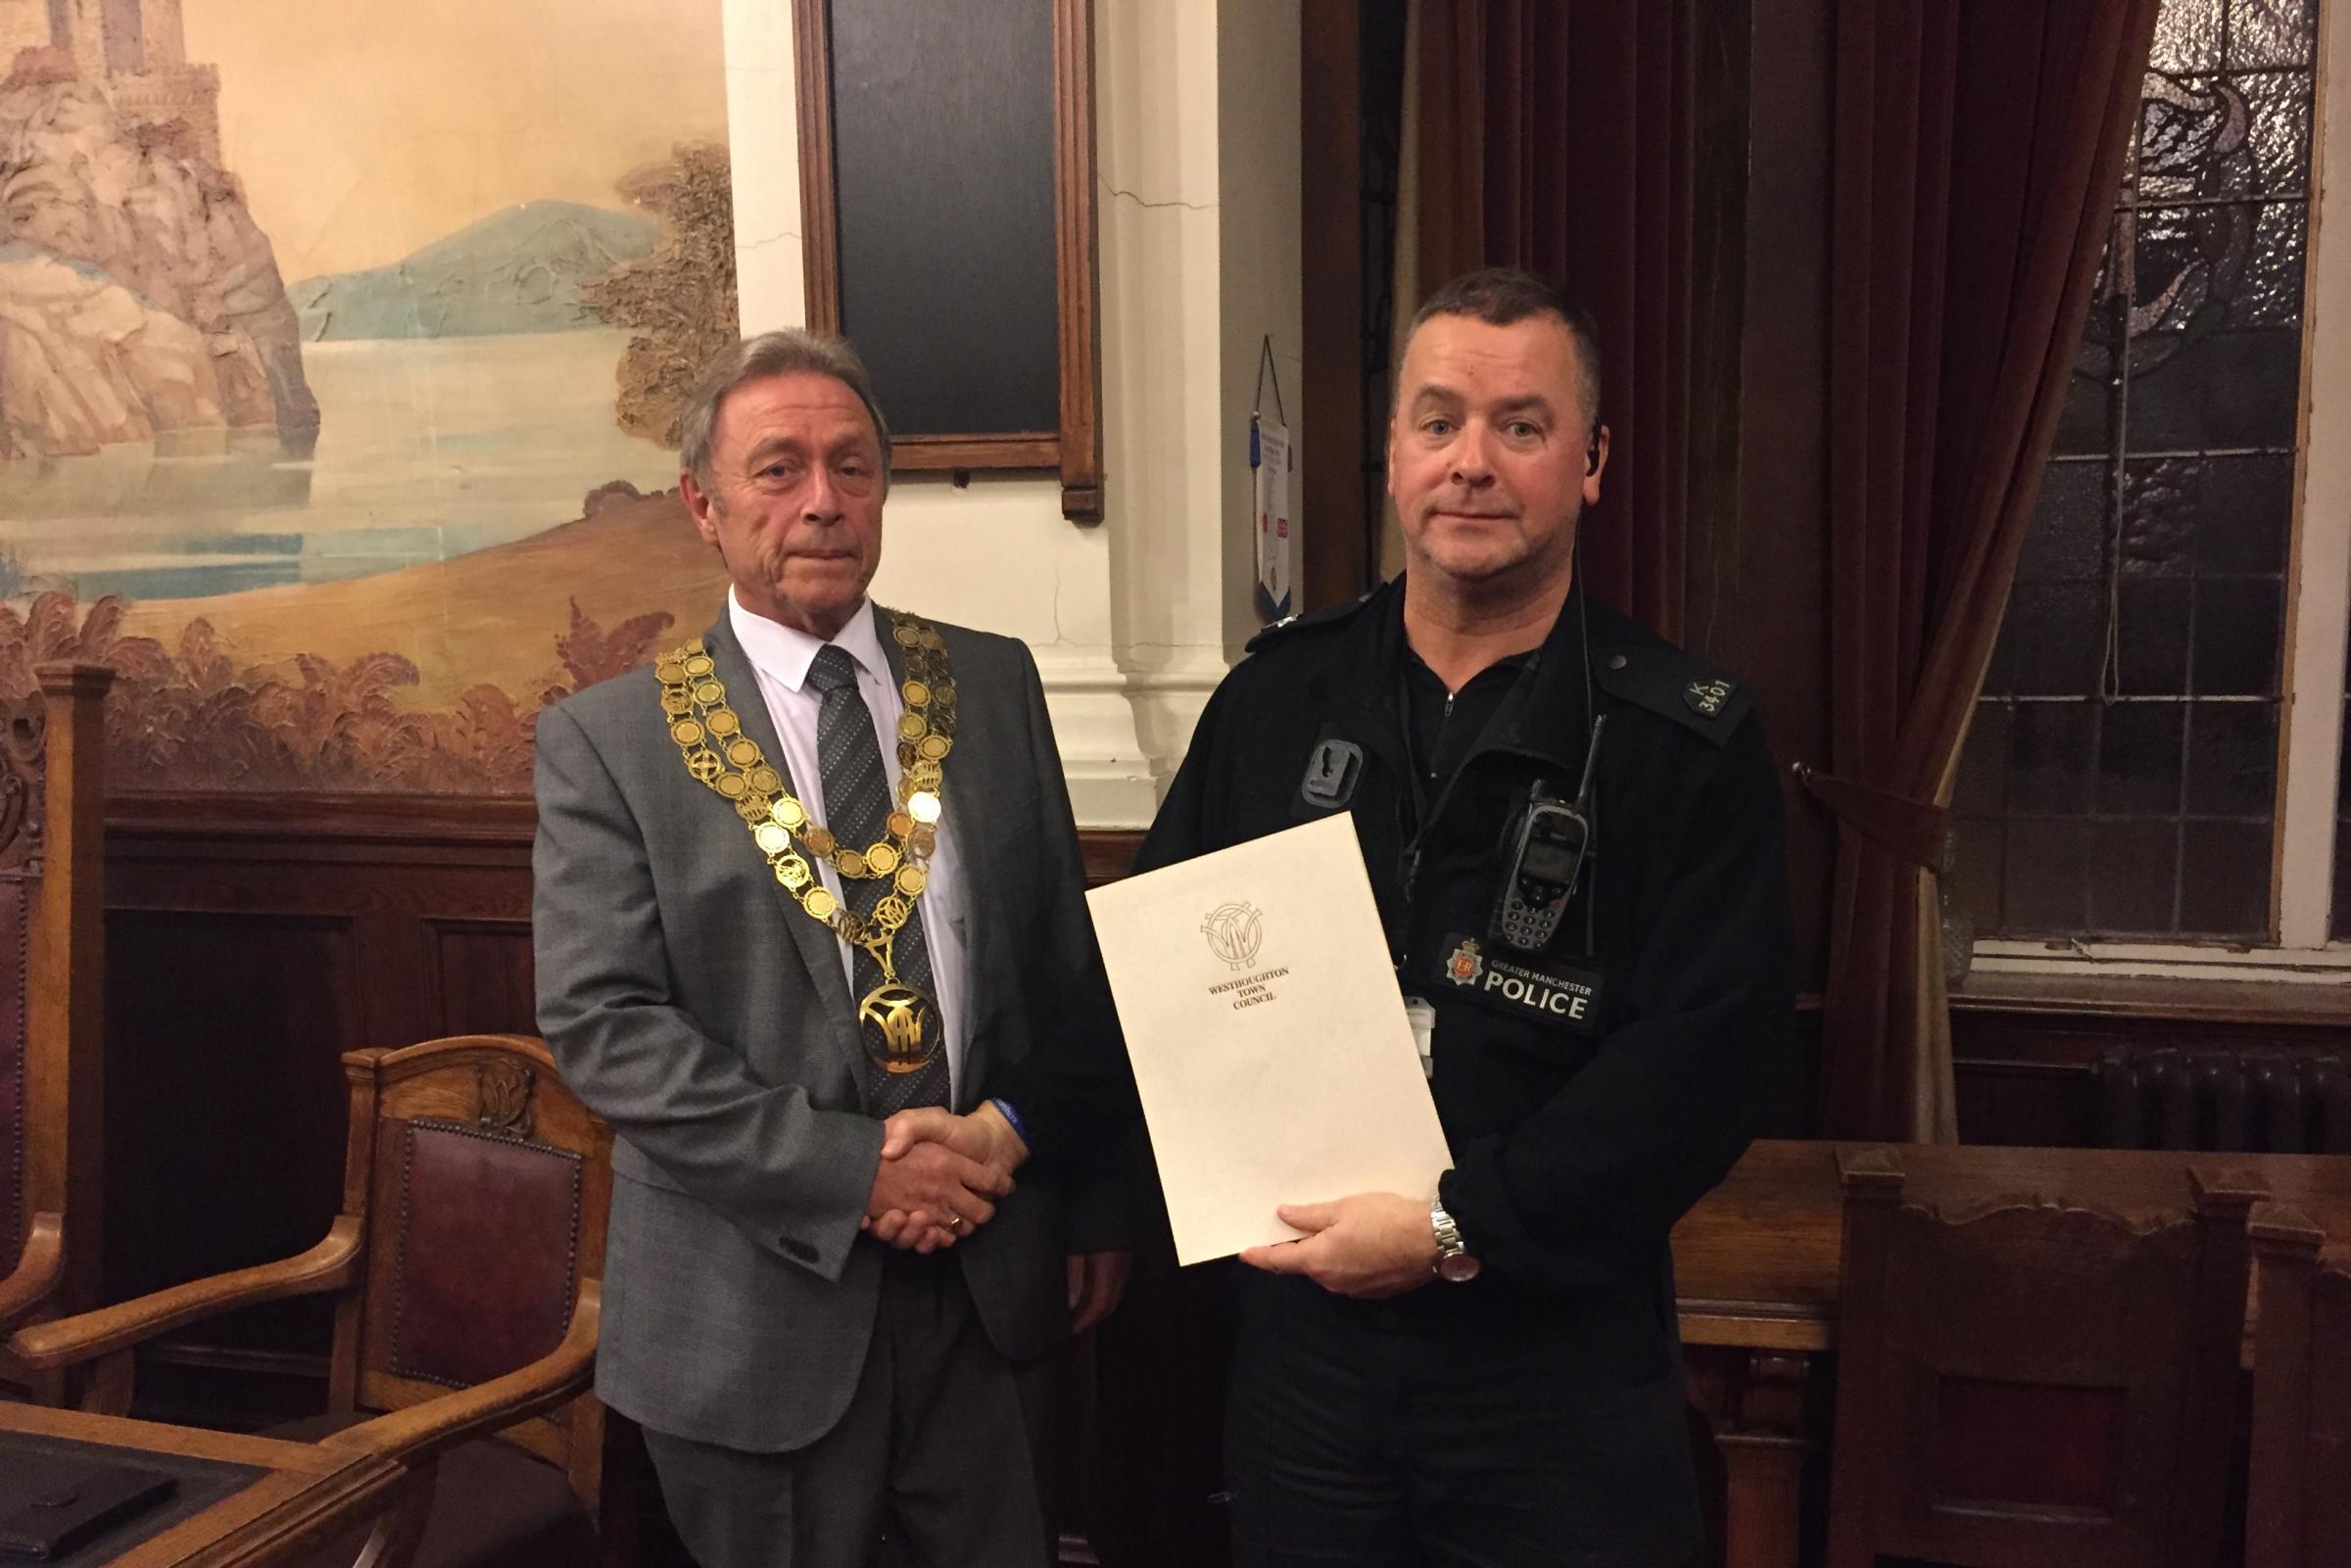 Longest serving officer receives special award after nearly two decades on the streets